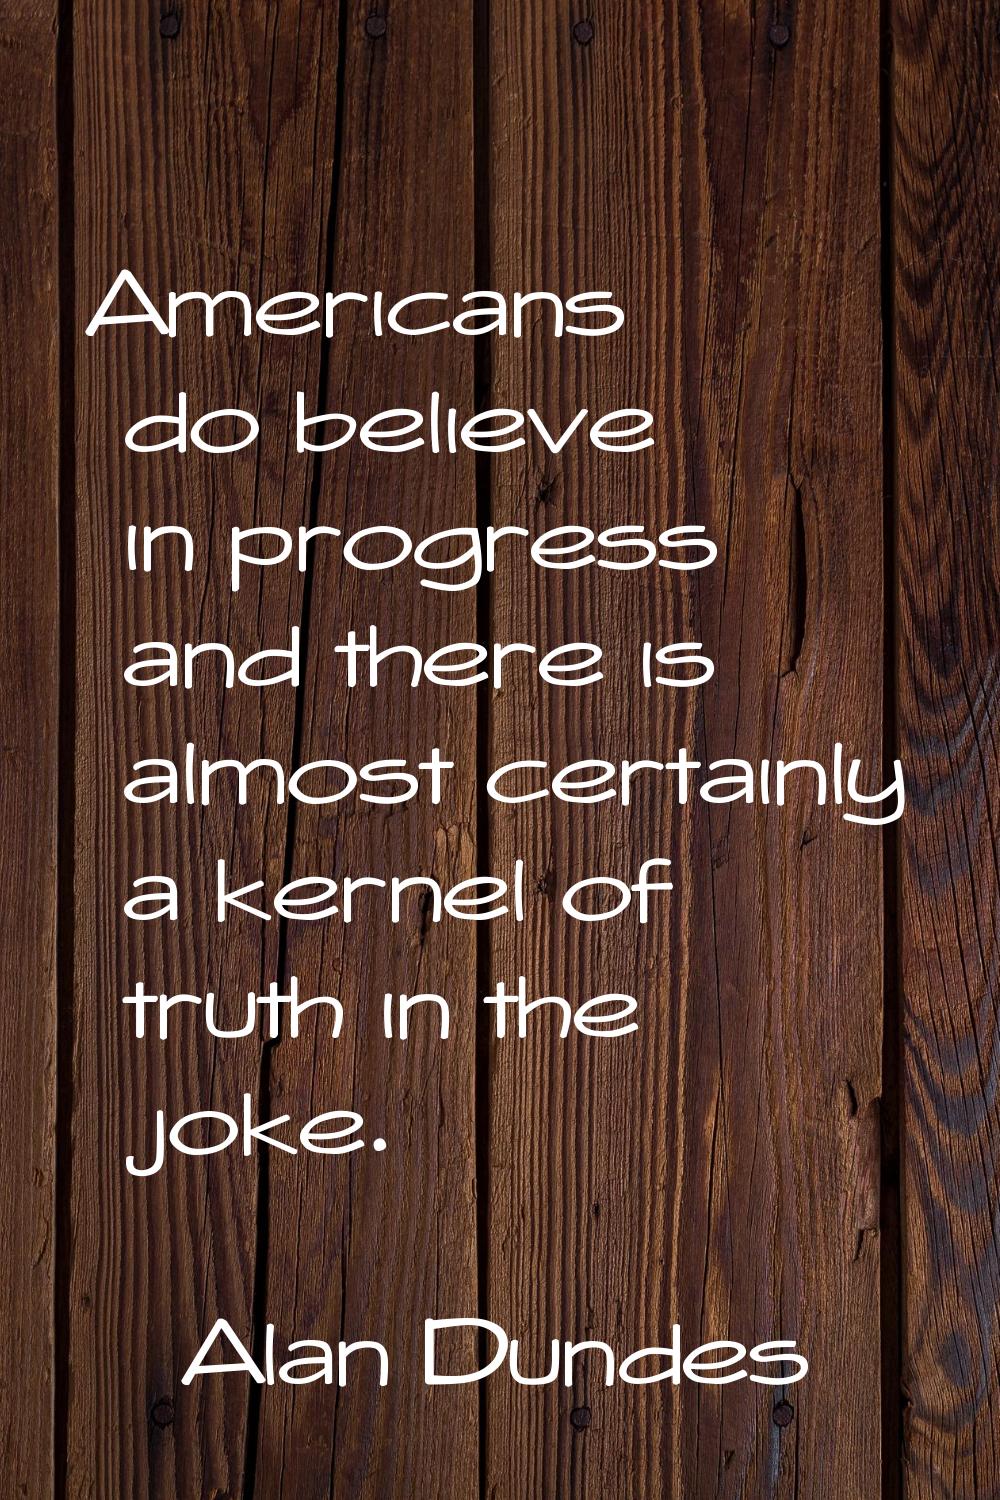 Americans do believe in progress and there is almost certainly a kernel of truth in the joke.